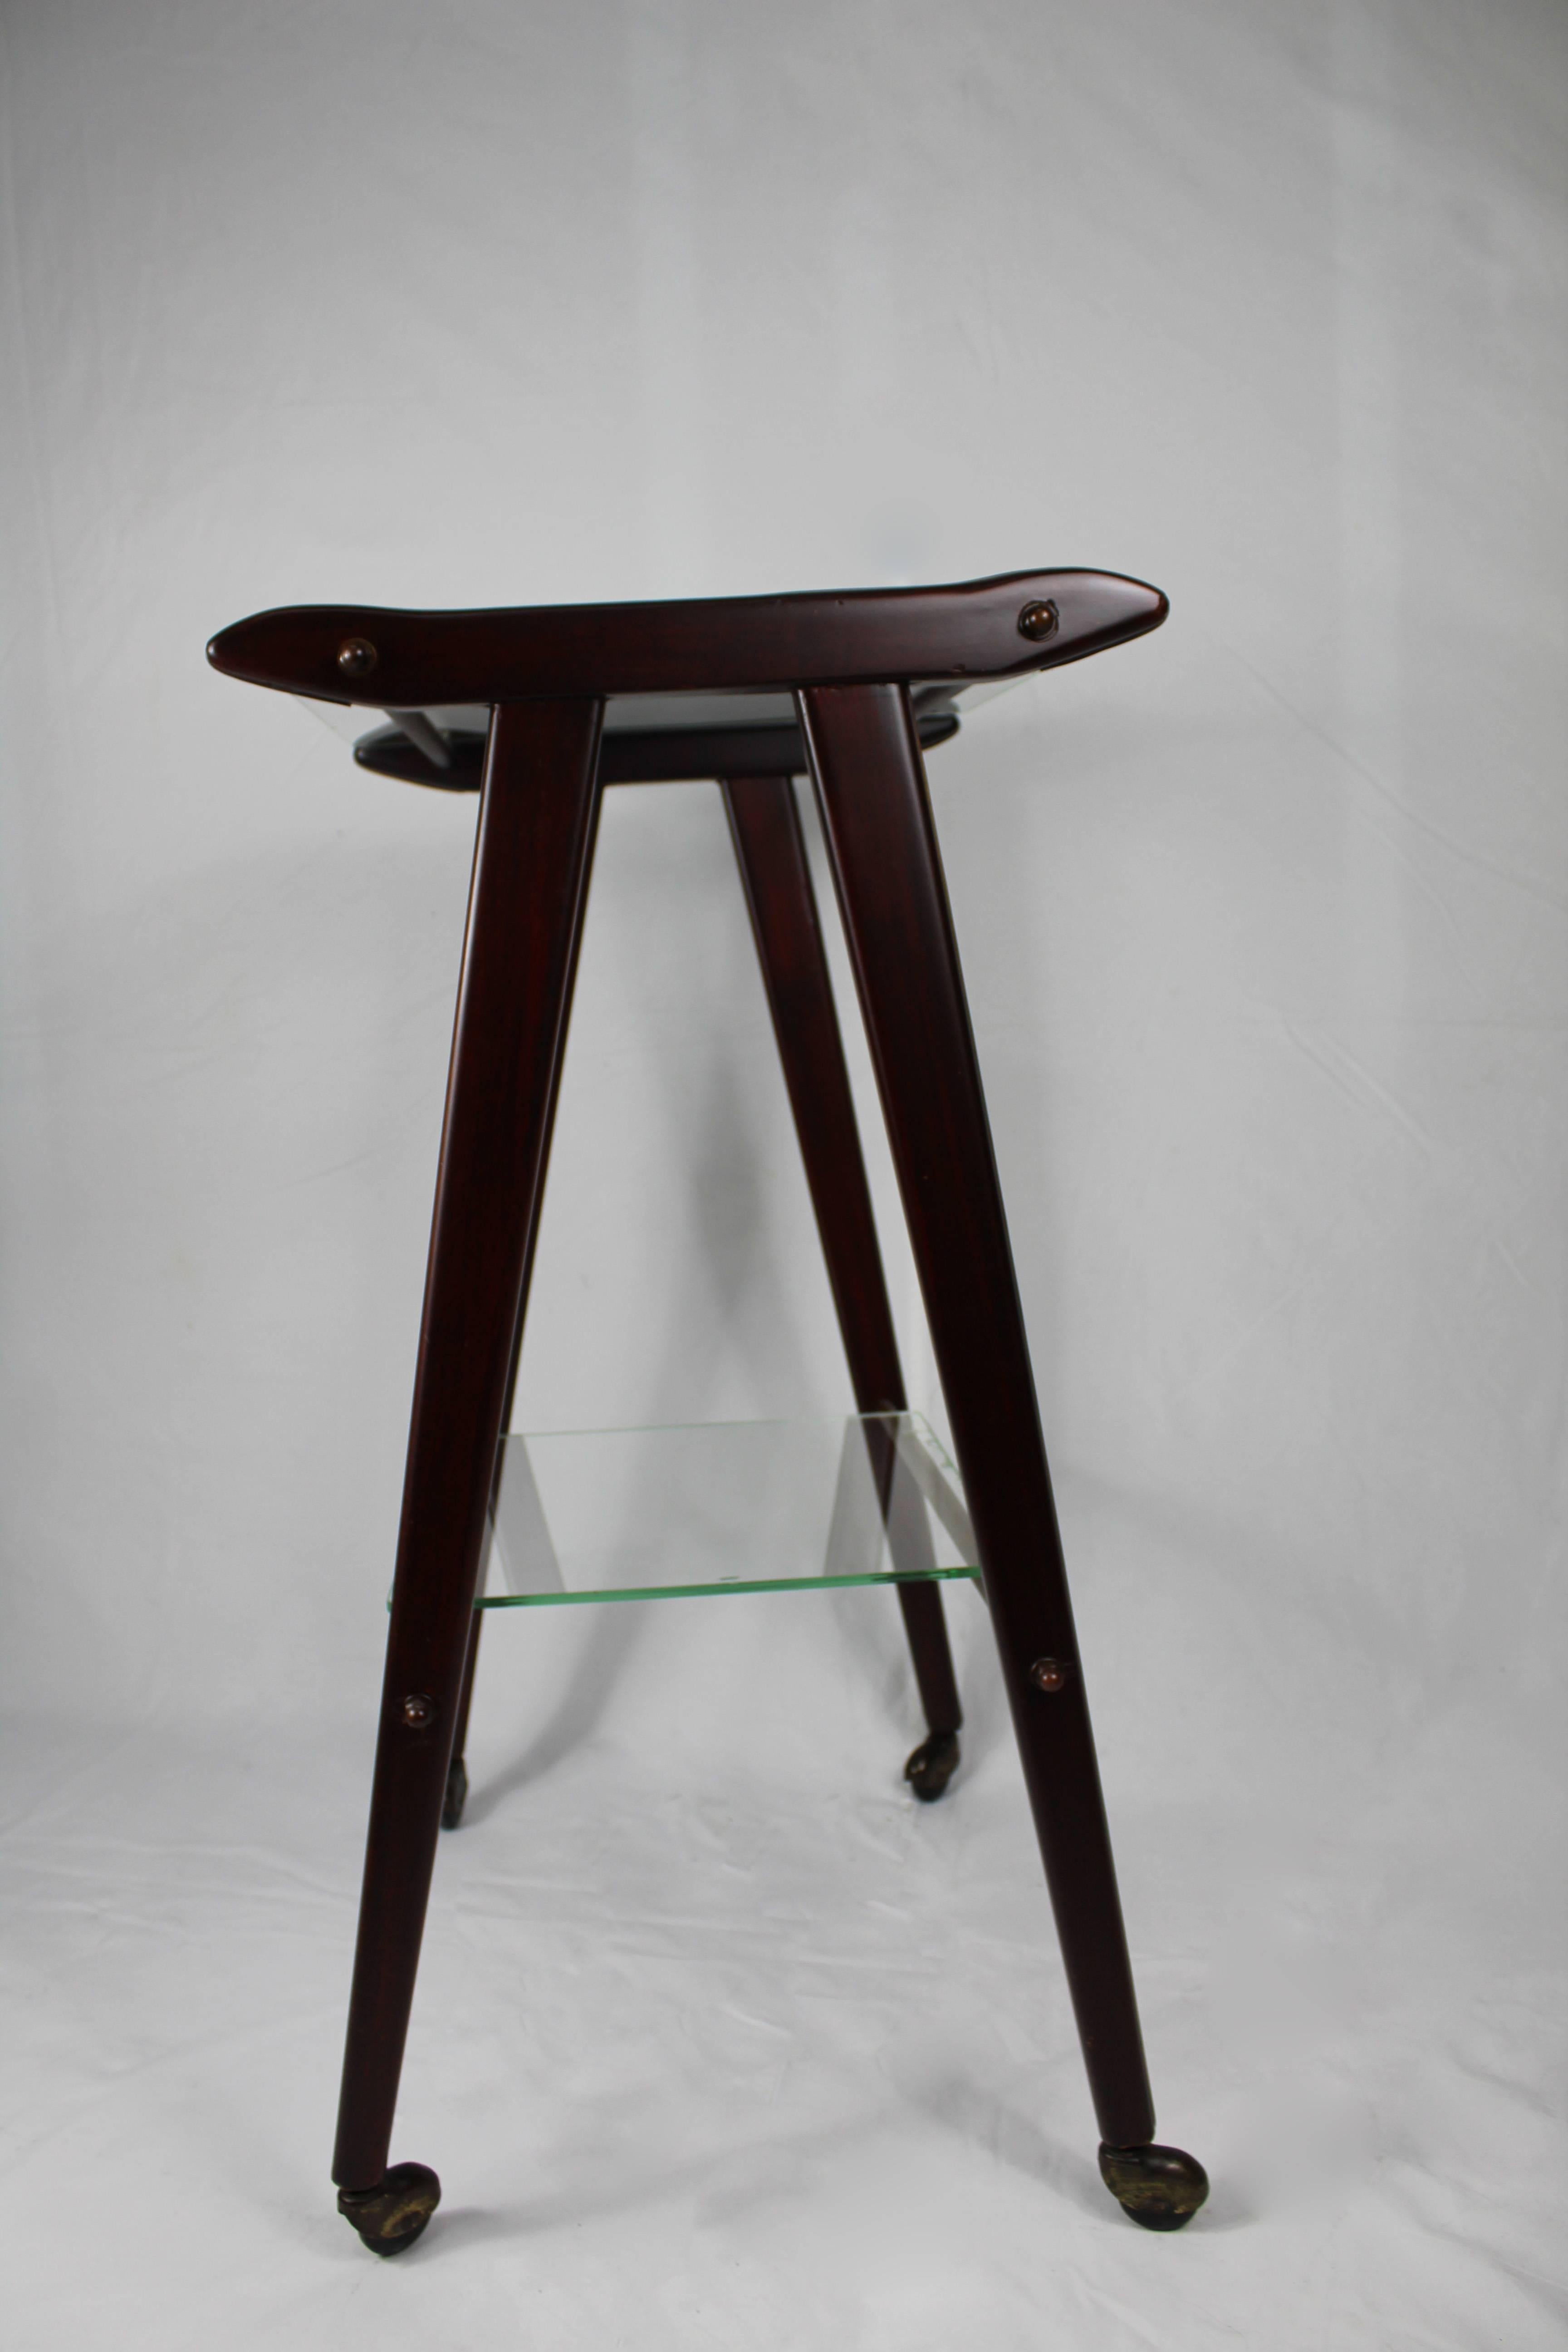 Mid-20th Century Italian Television Table Wood and Glass, 1950s For Sale